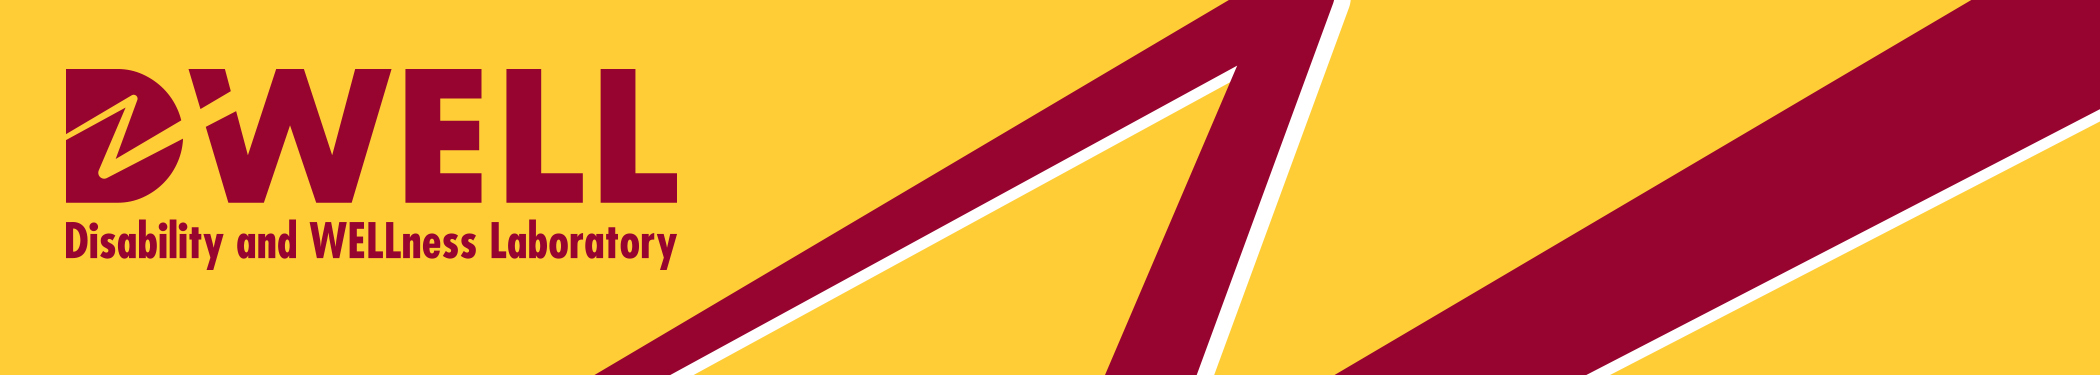 Disability and Wellness Laboratory (DWELL) - maroon and gold banner